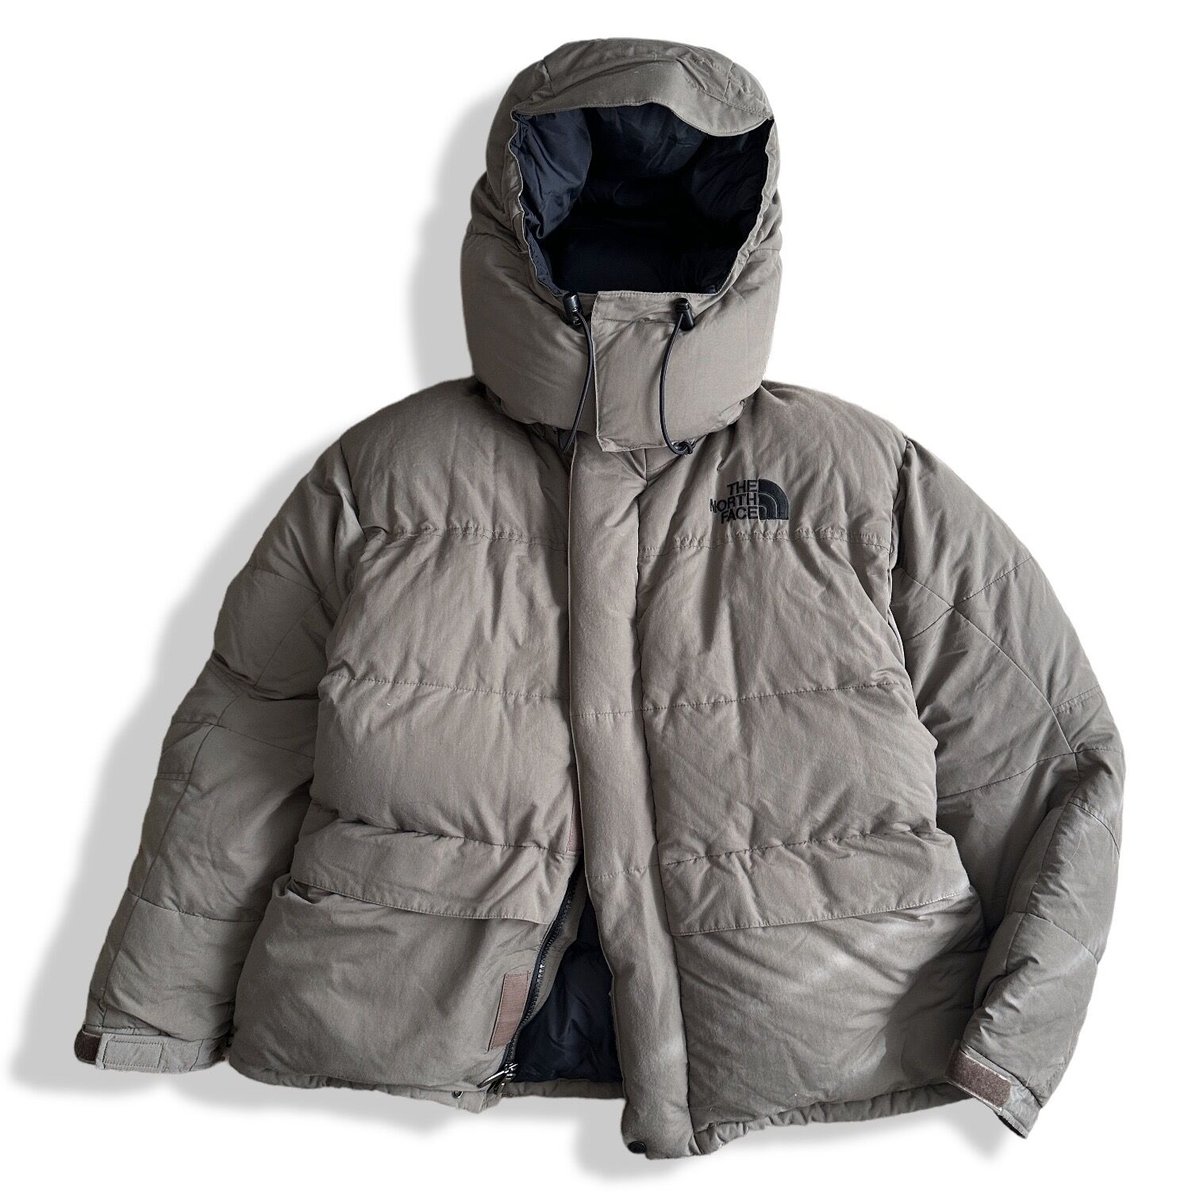 Baffin JKT by THE NORTH FACE